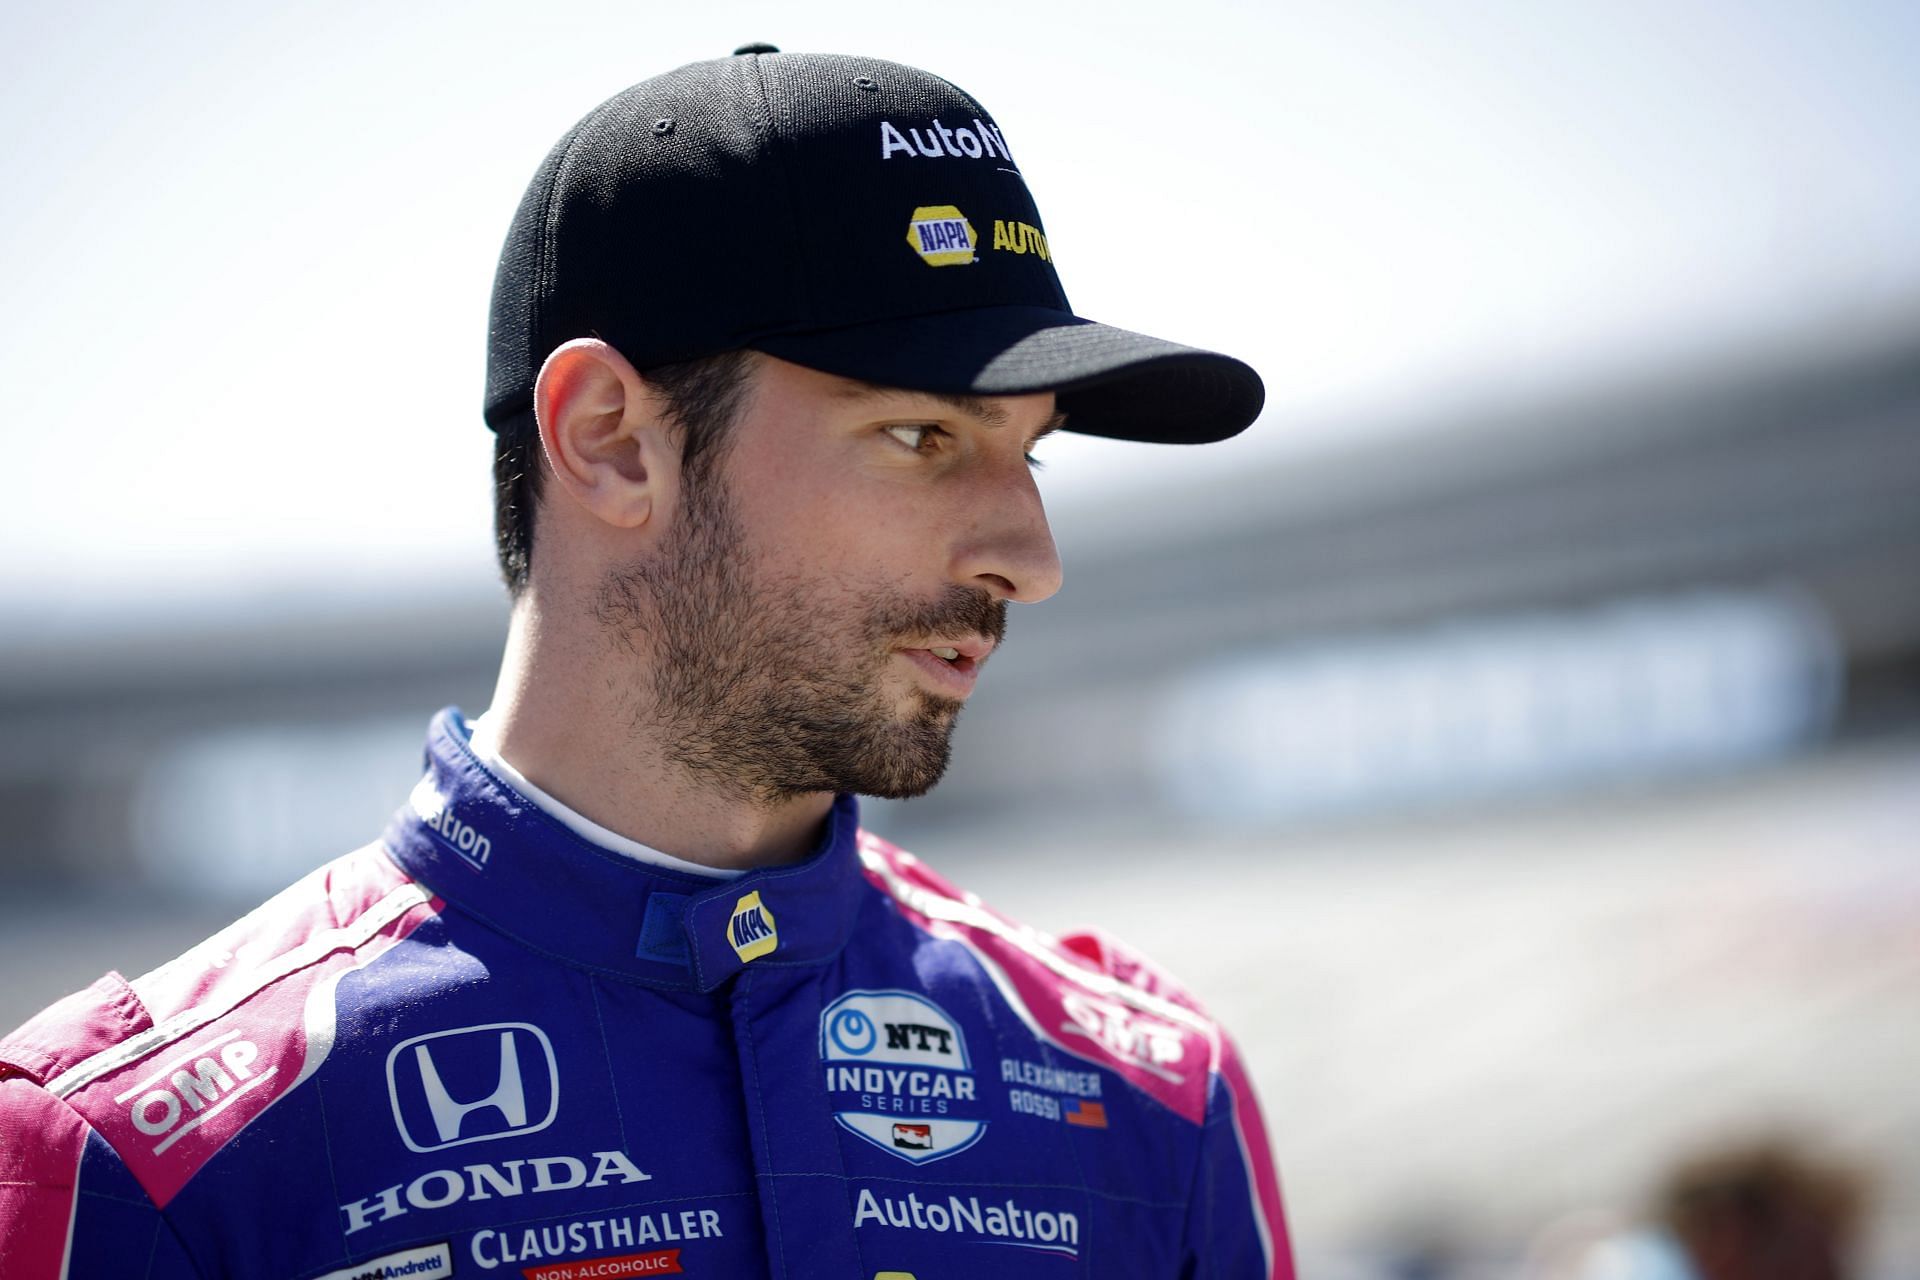 Alexander Rossi at the NTT IndyCar Series XPEL 375 - Qualifying